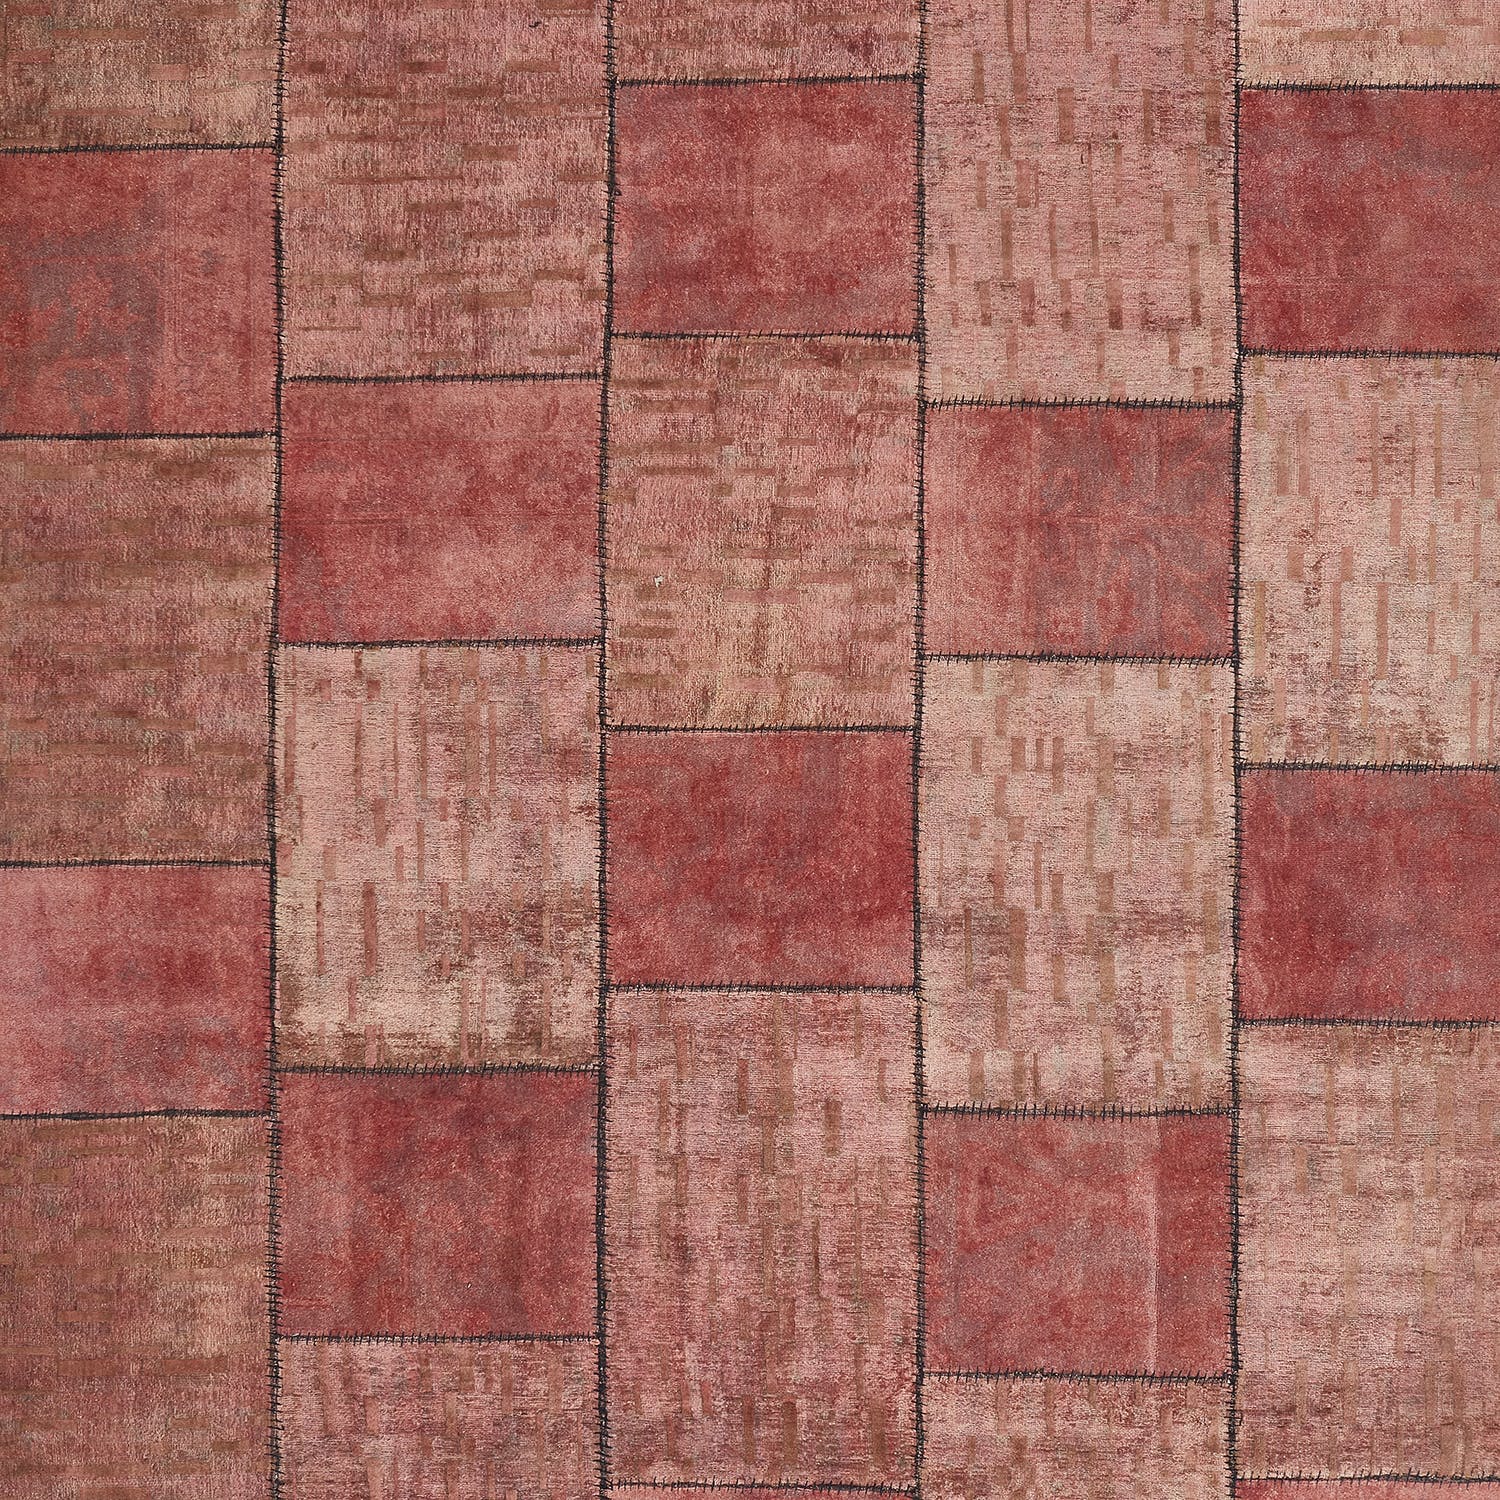 Patchwork textile-like surface with red and beige square blocks